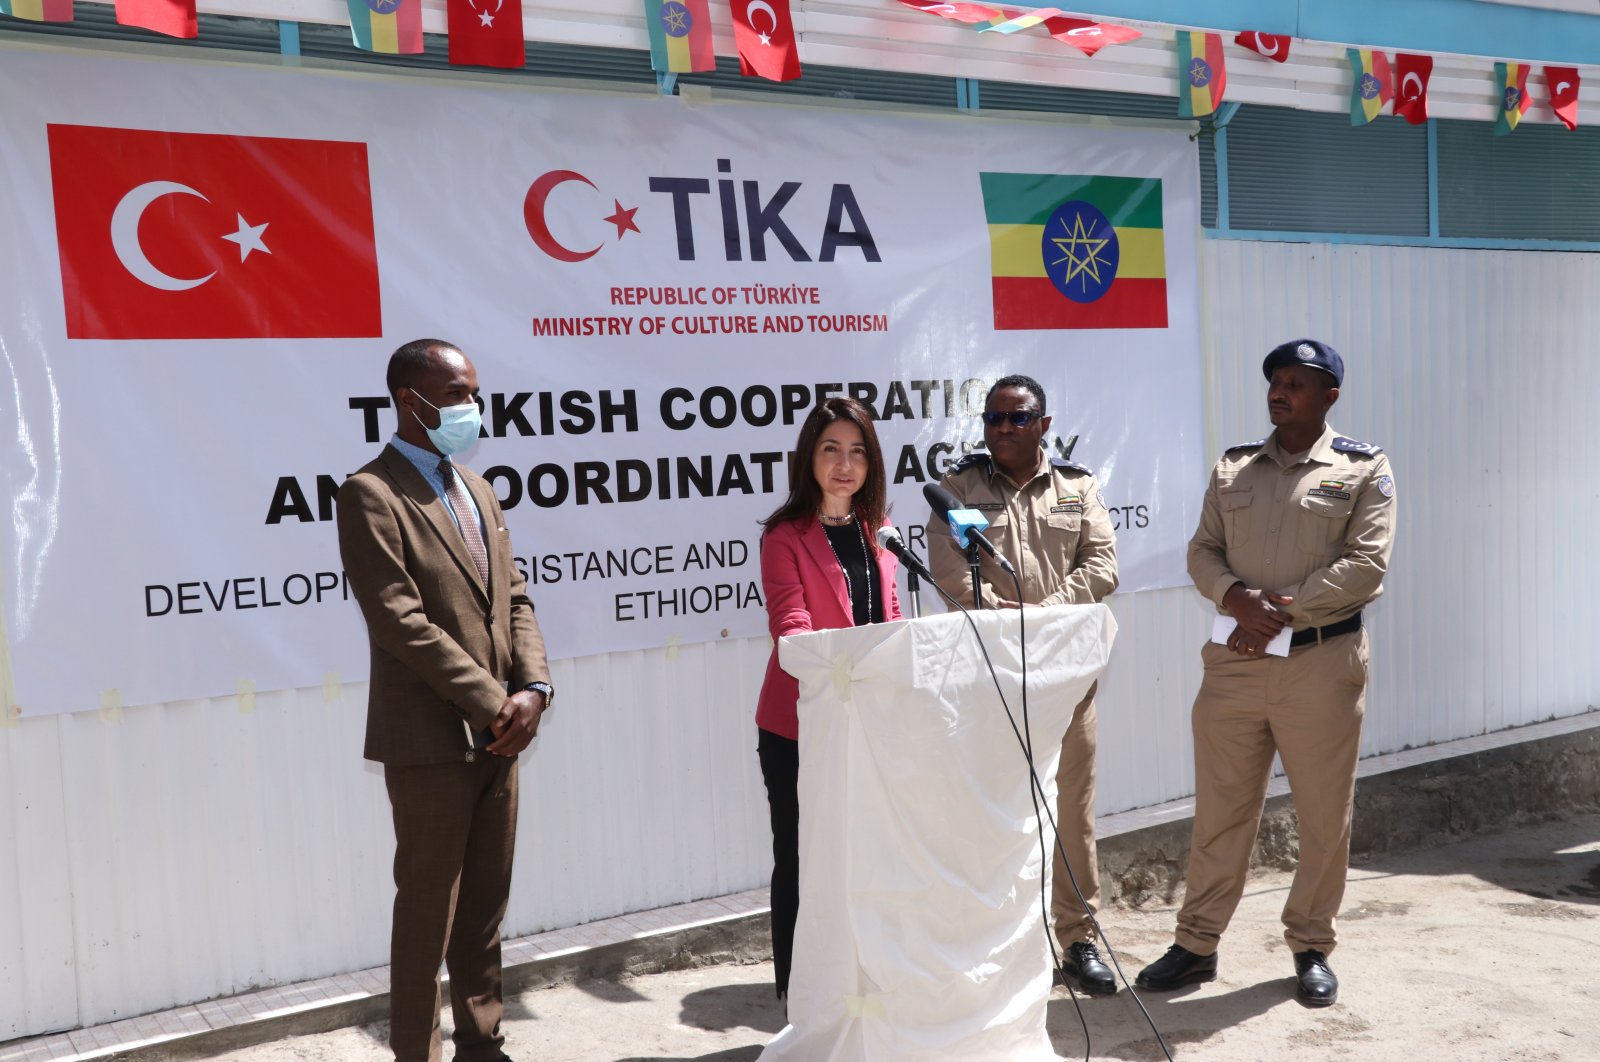 Turkey&#039;s envoy to Ethiopia, Yaprak Alp is seen at the Turkish Cooperation and Coordination Agency&#039;s (TIKA) opening of a health center in Addis Ababa, Ethiopia, Feb. 2, 2022. (AA Photo)